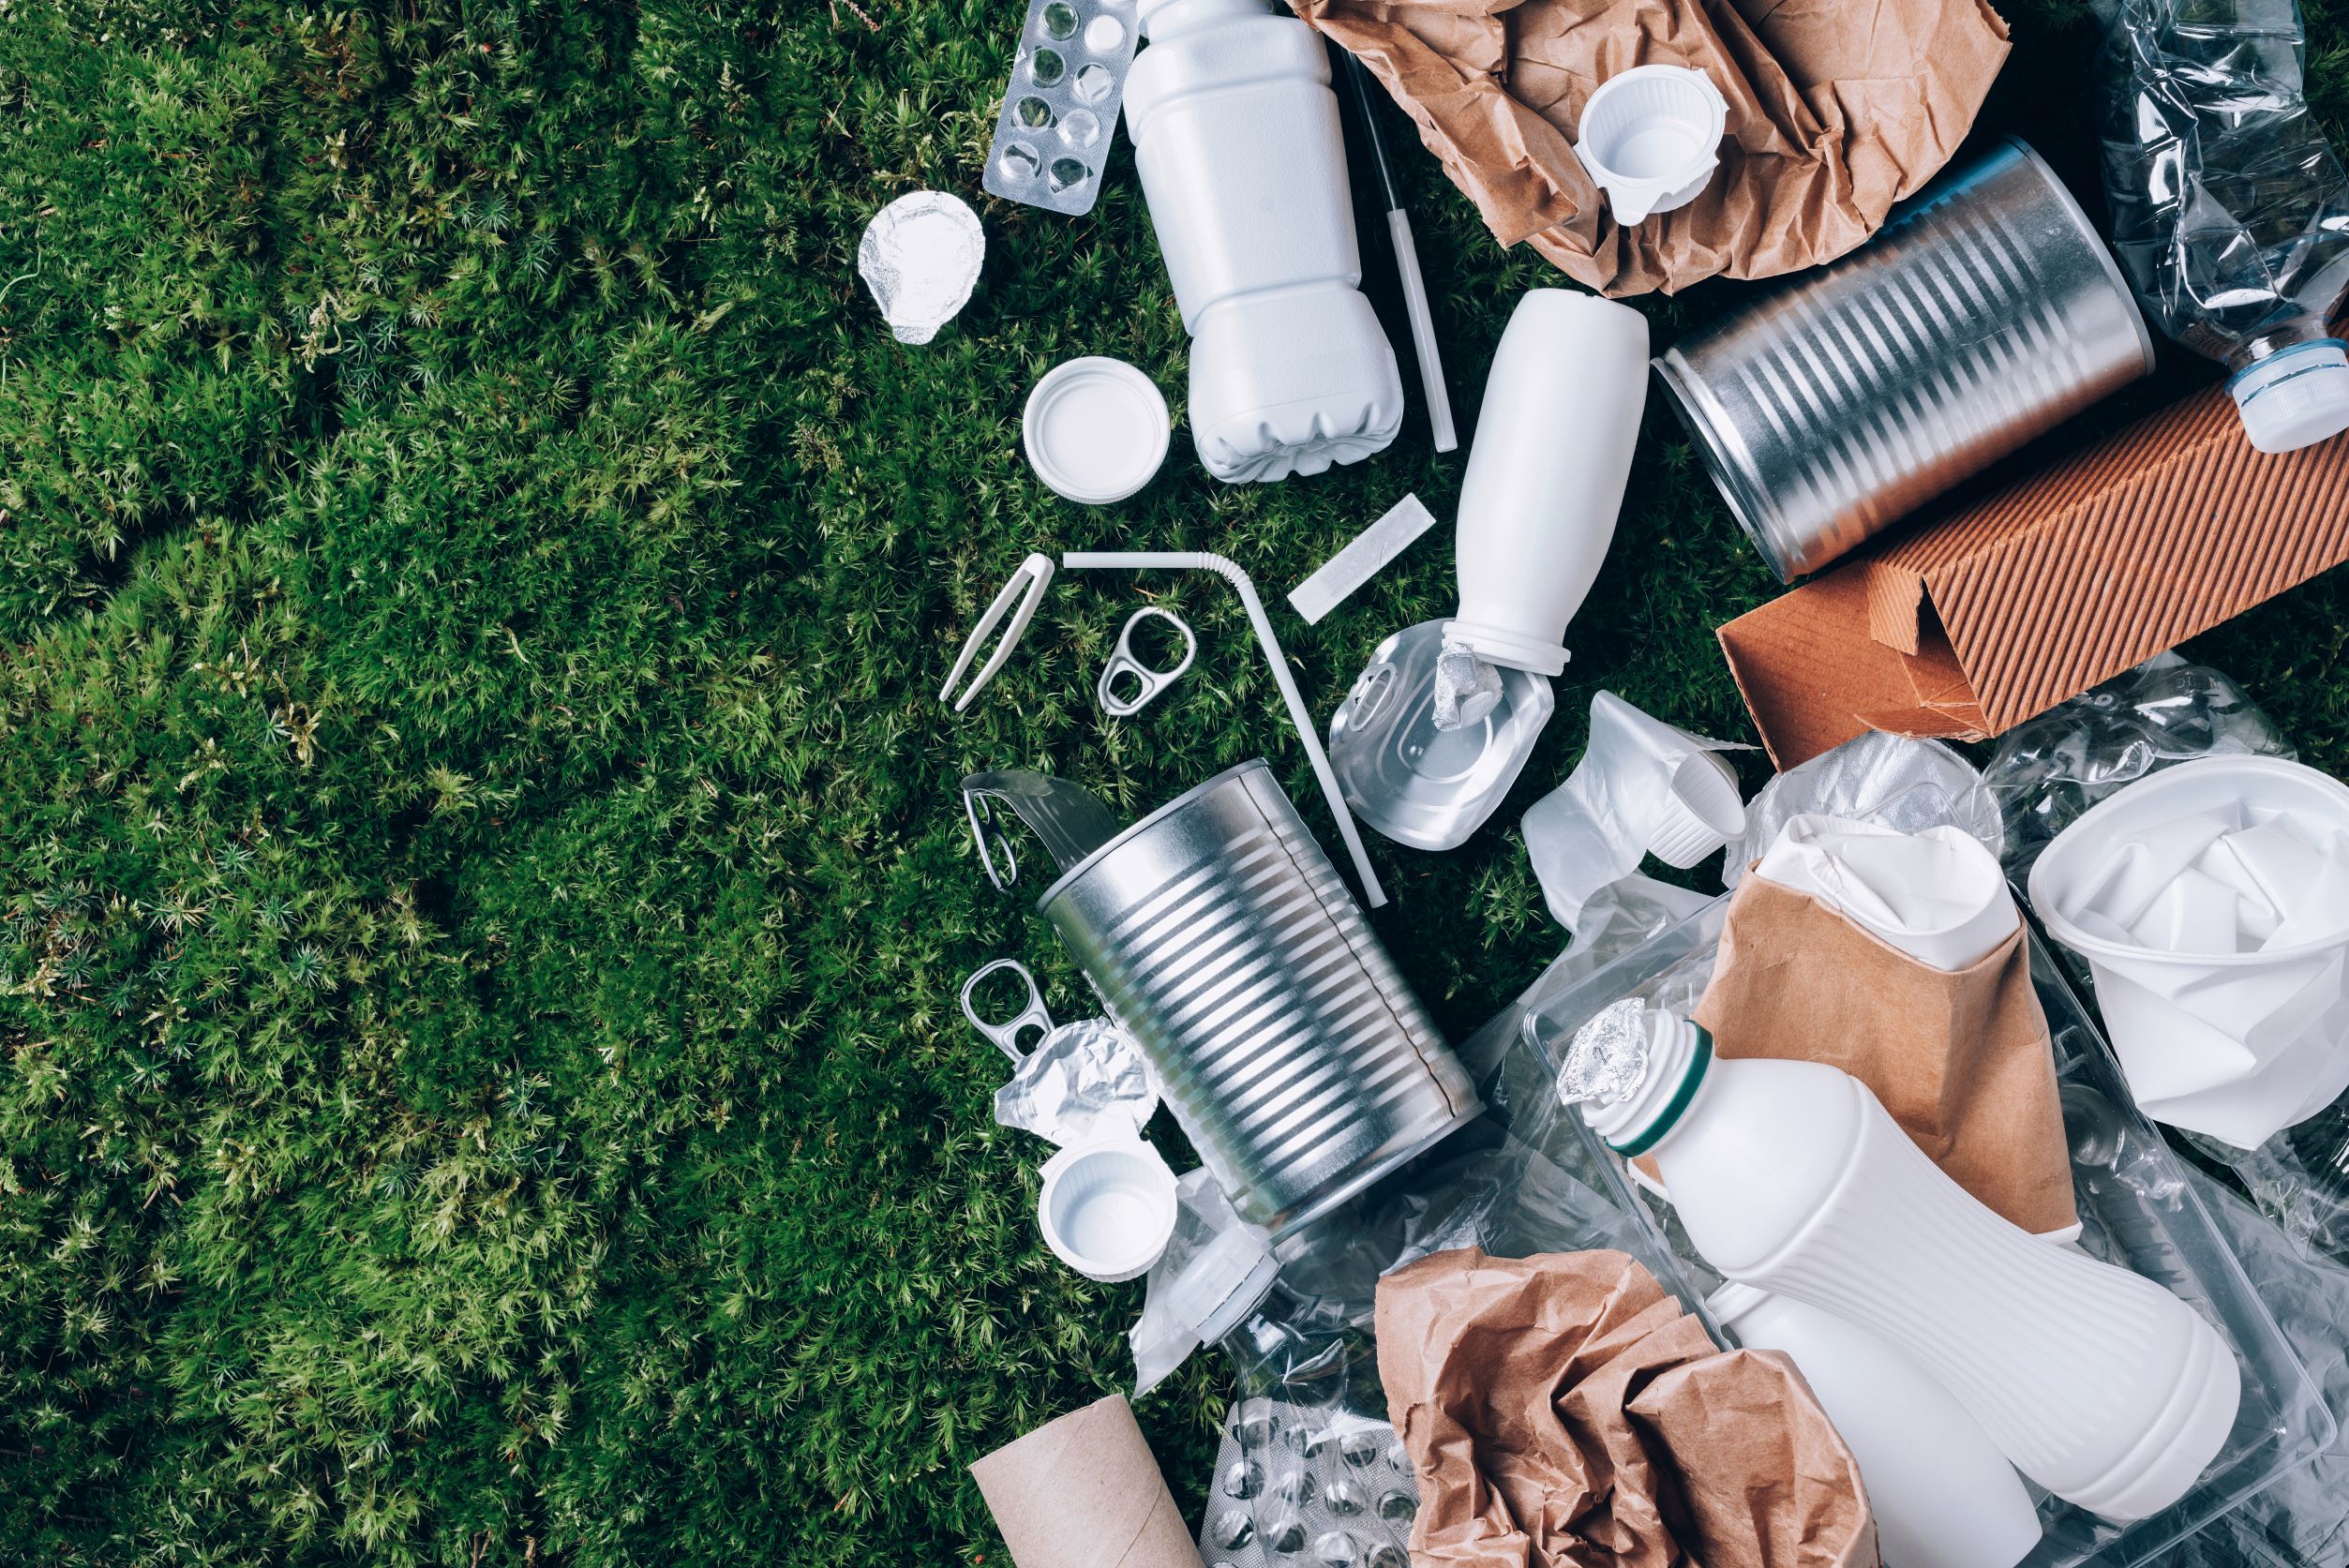 Packaging and sustainability – how can we ease the transition?